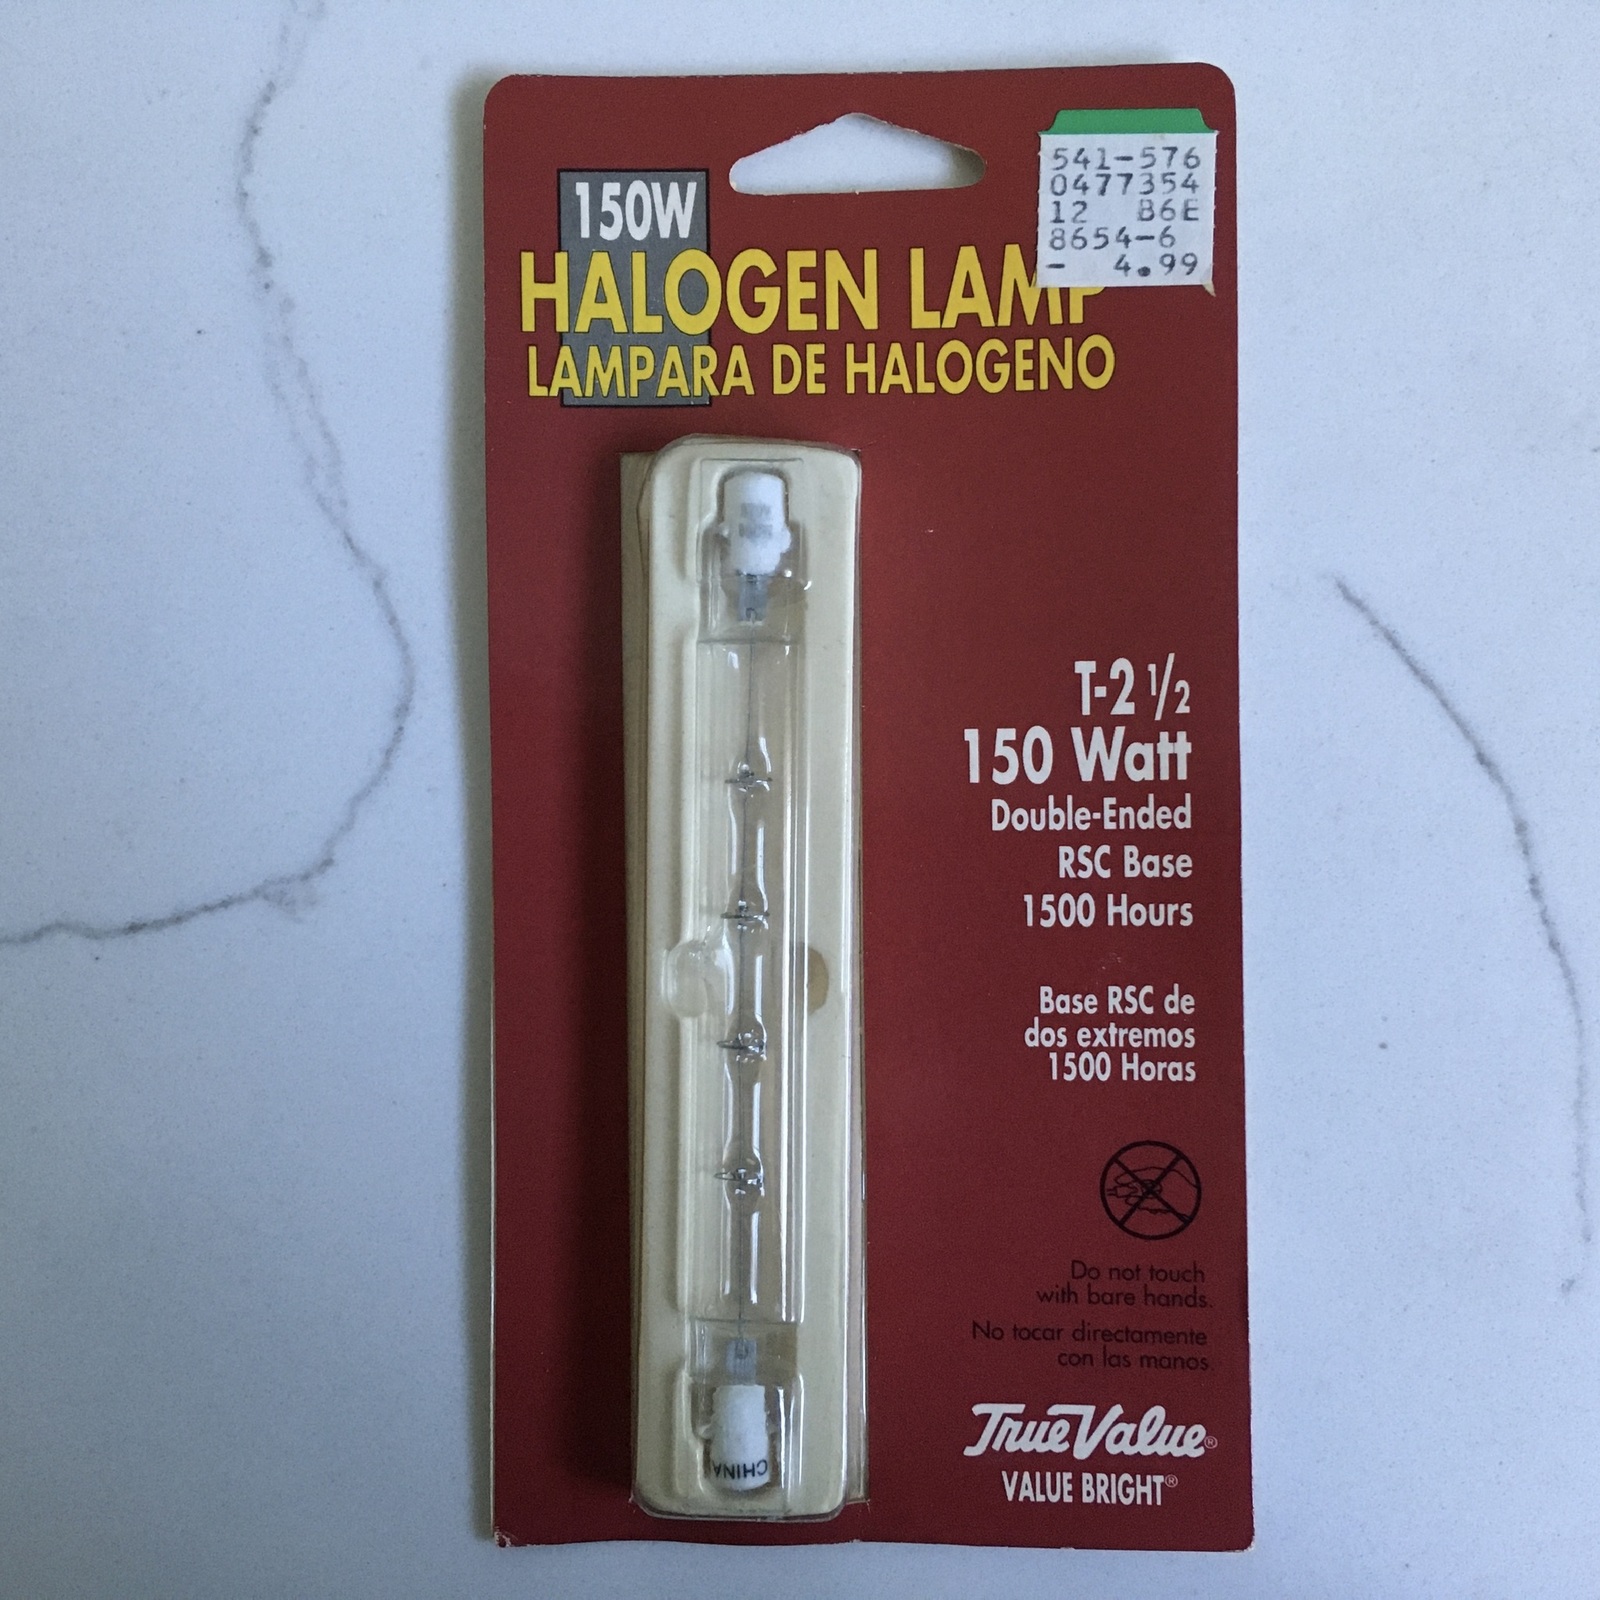 Primary image for Halogen Lamp T-½ 150 Watt True Value 541-576 Clear Double Ended RSC Base